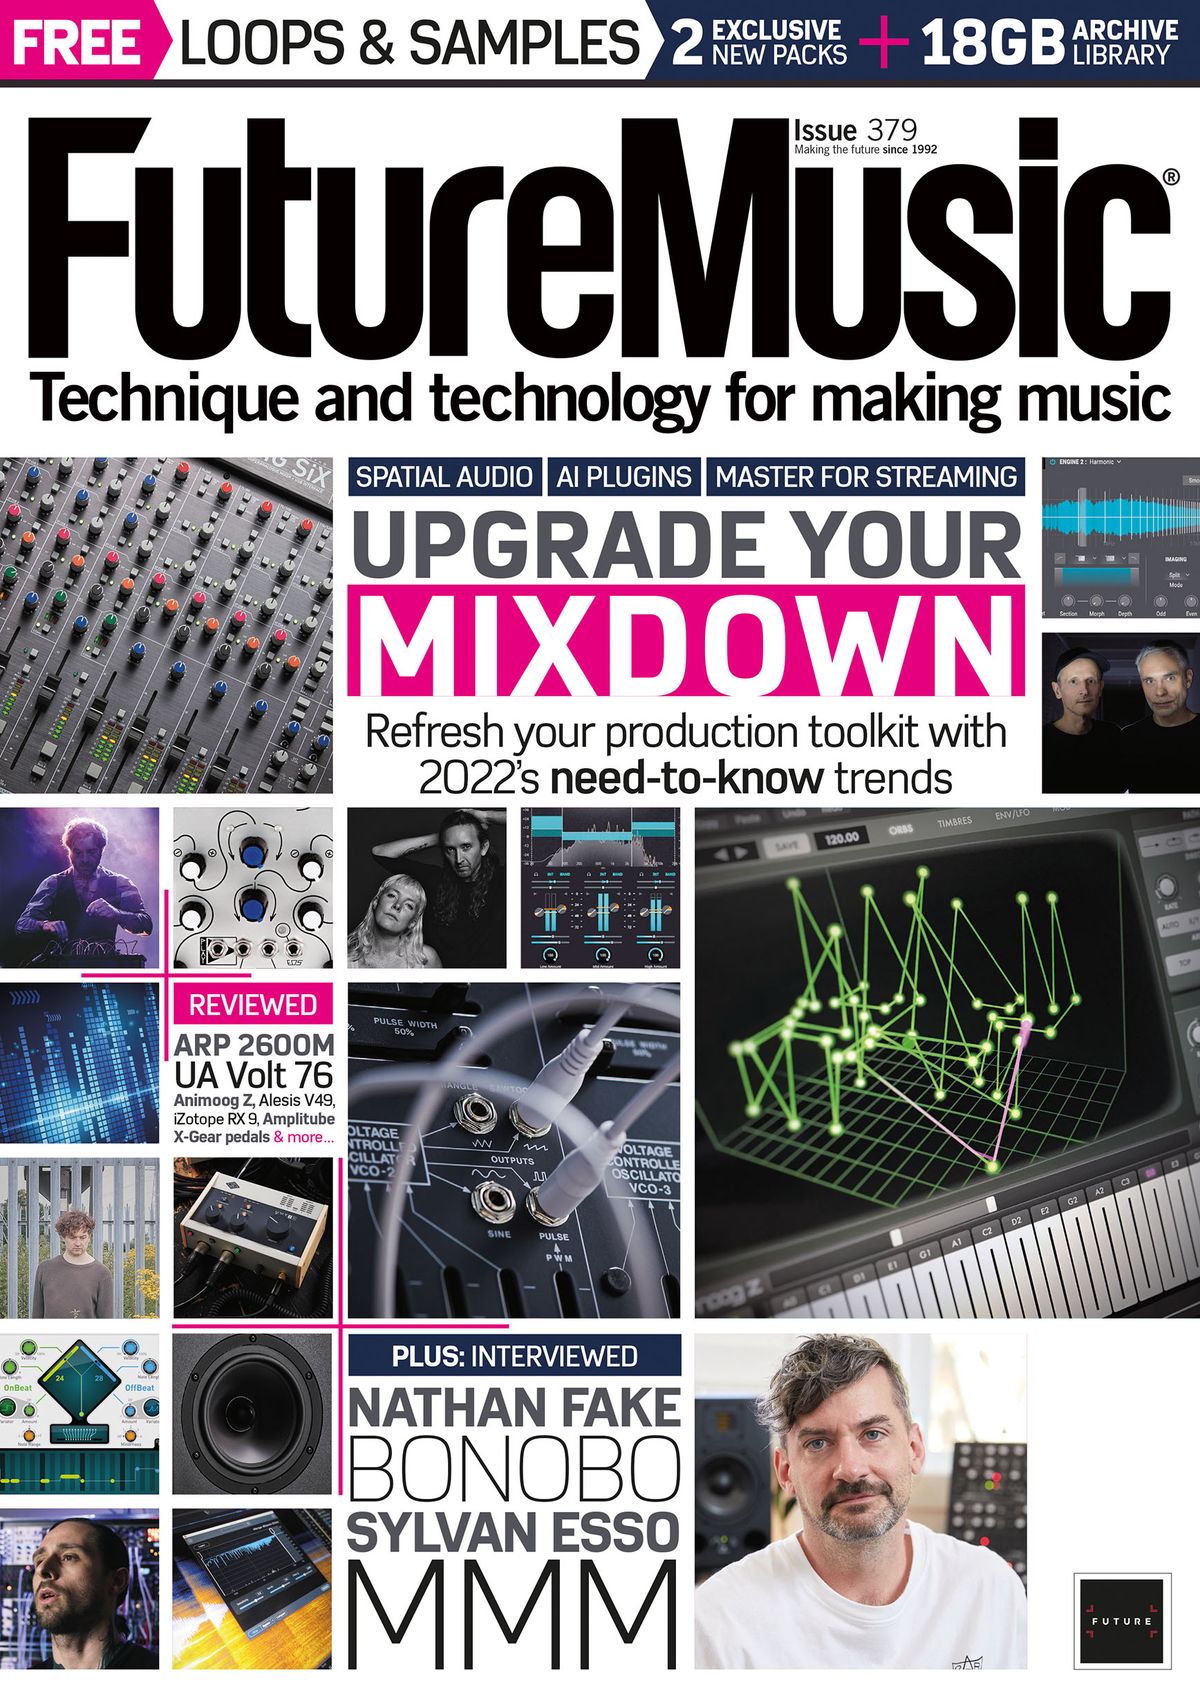 Issue 379 of Future Music is out now | MusicRadar